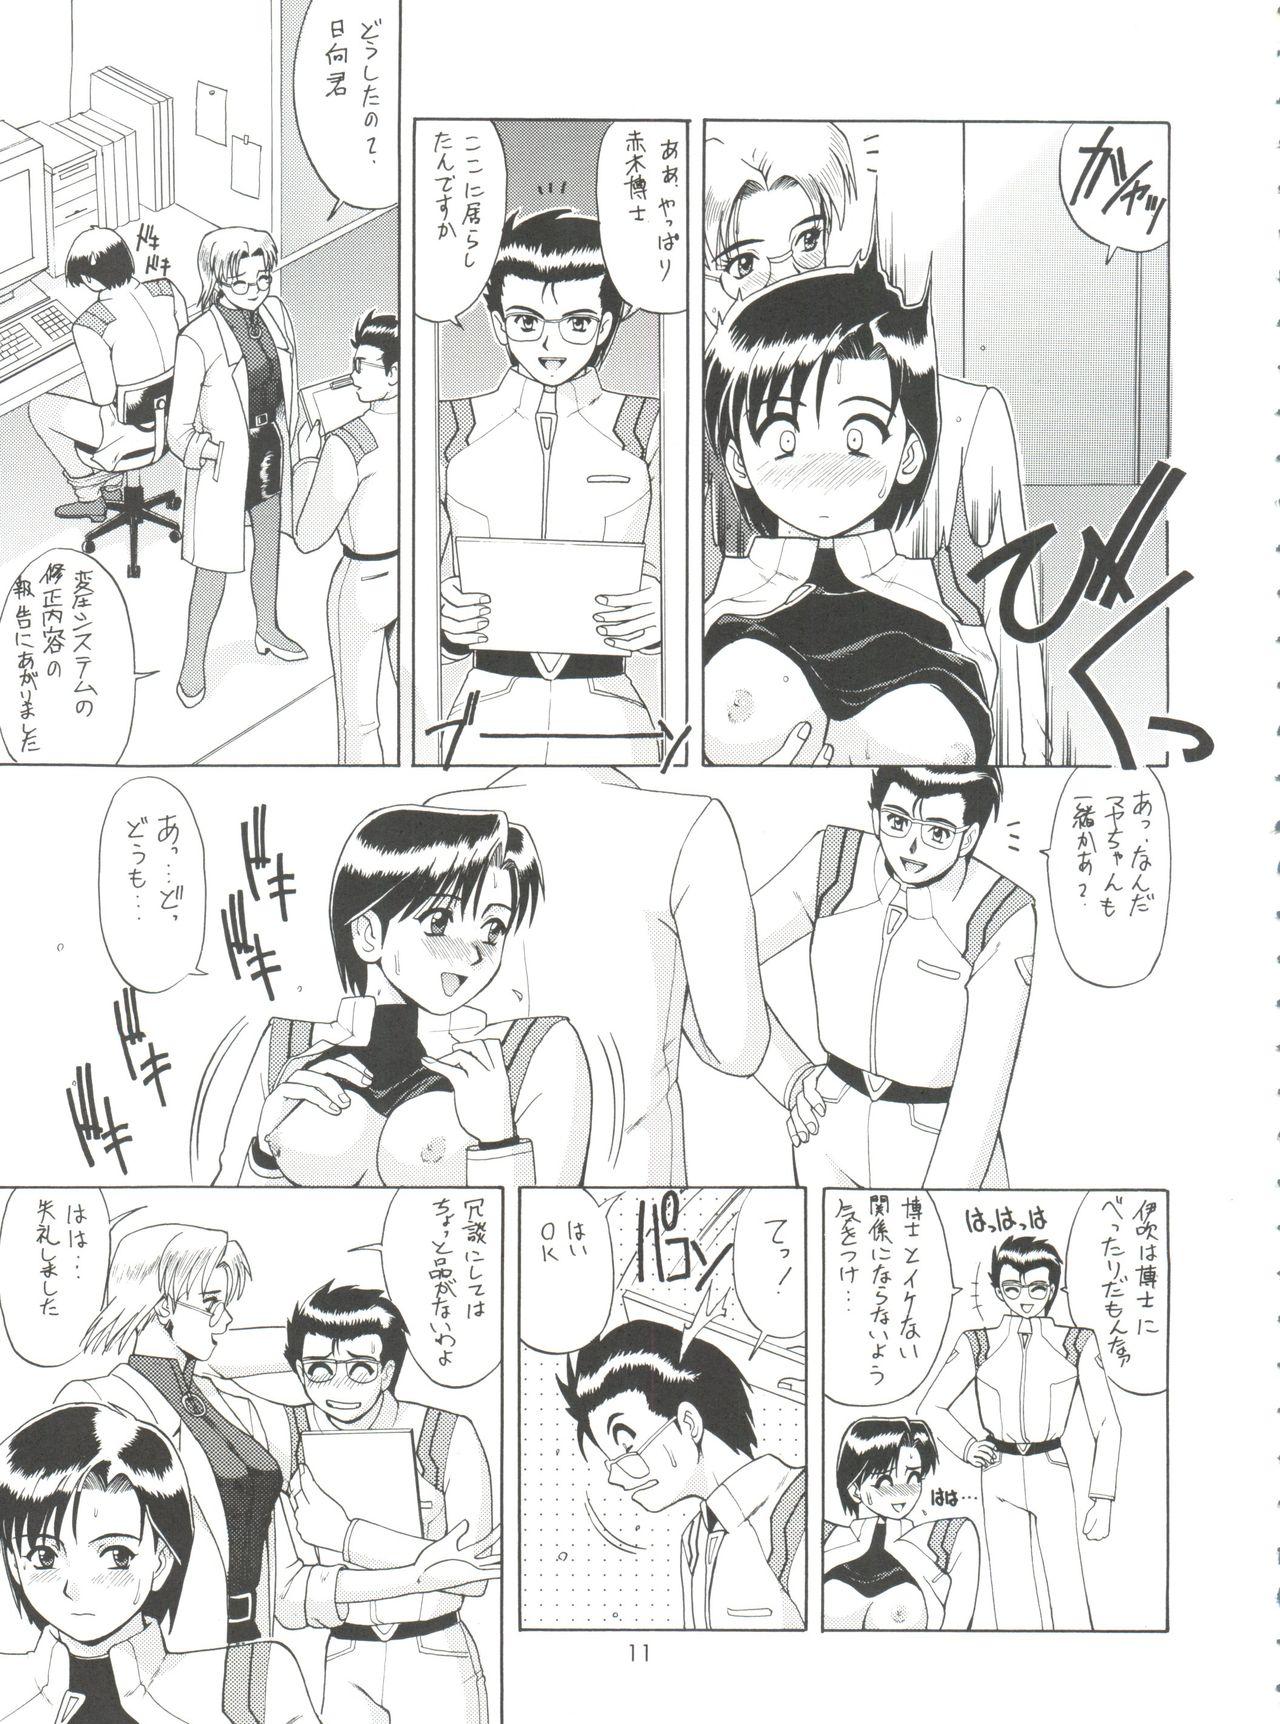 Tiny Tits Porn Suite For My Sweet Shinteiban - Neon genesis evangelion Old - Page 10